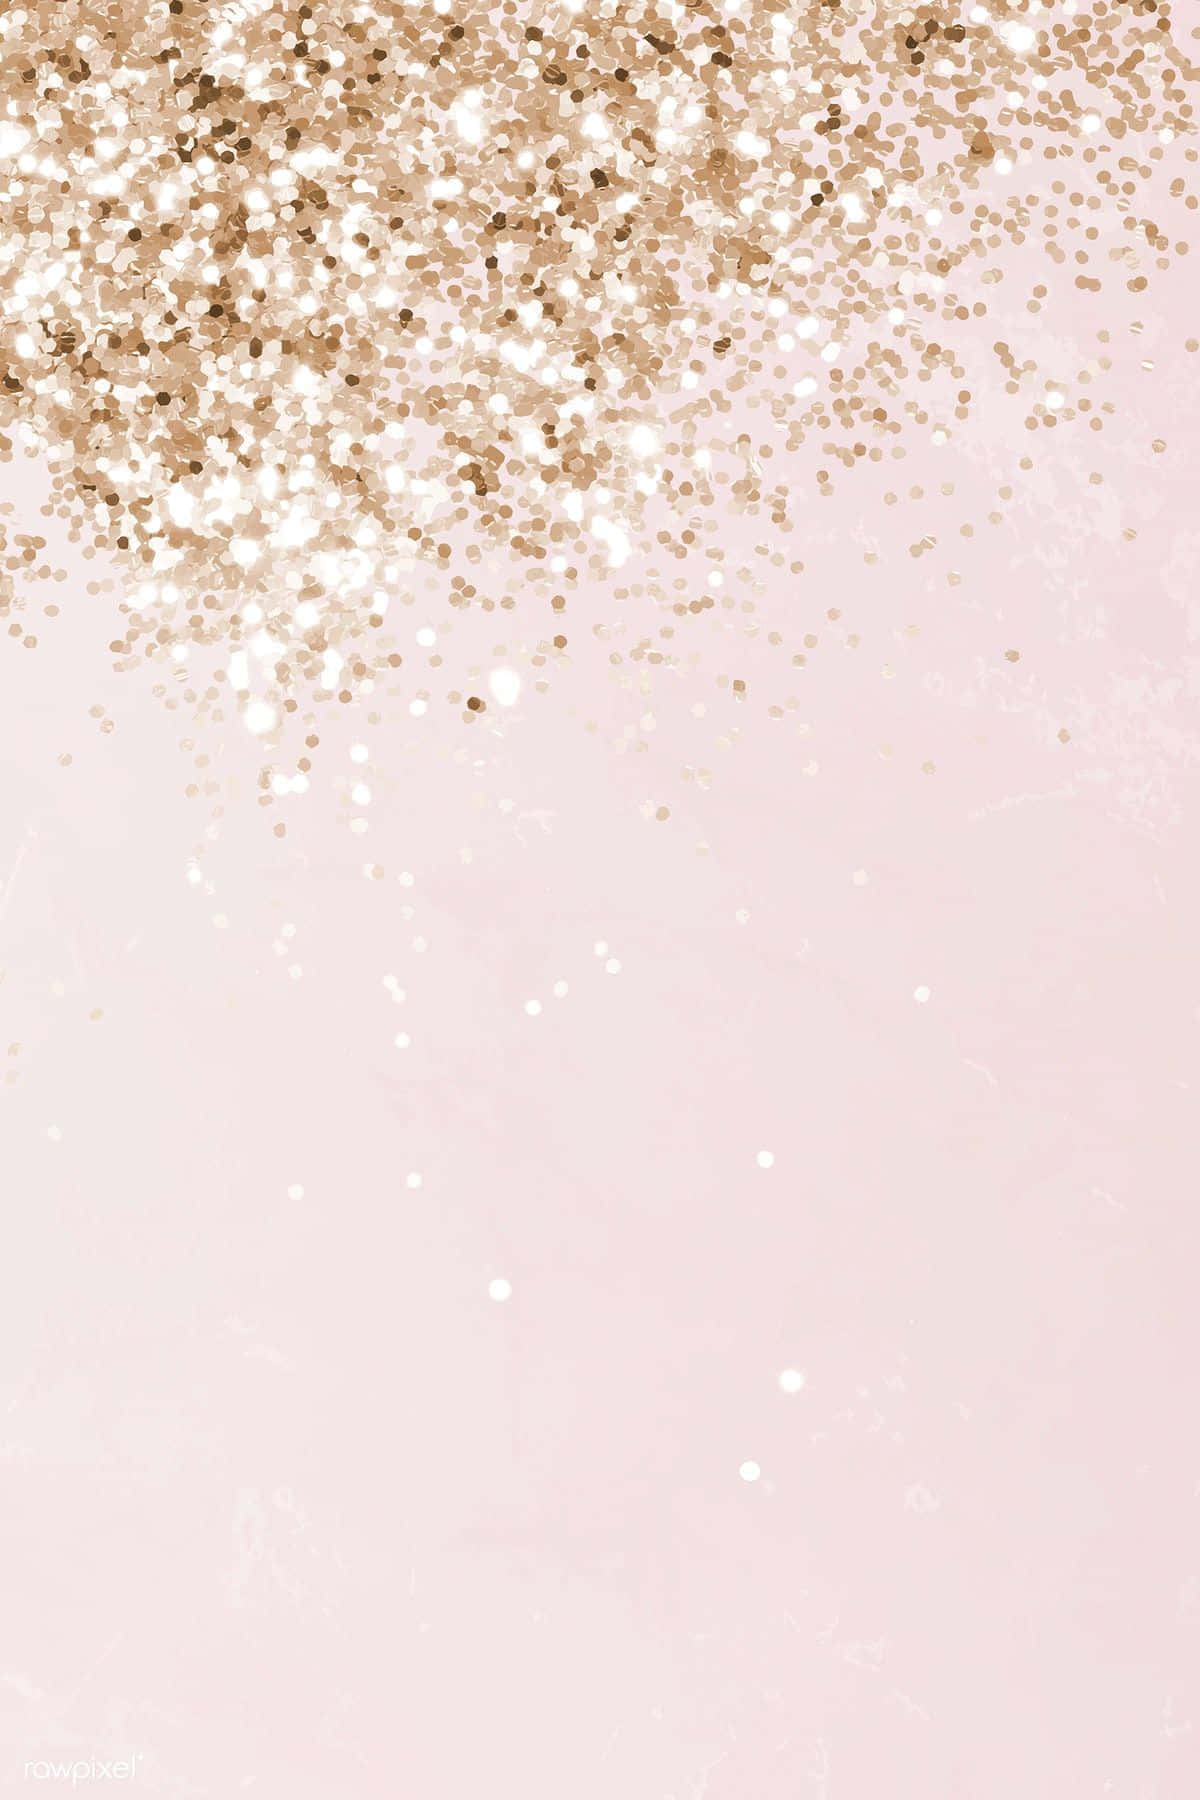 A Pink And Gold Glitter Background With A Gold Glitter